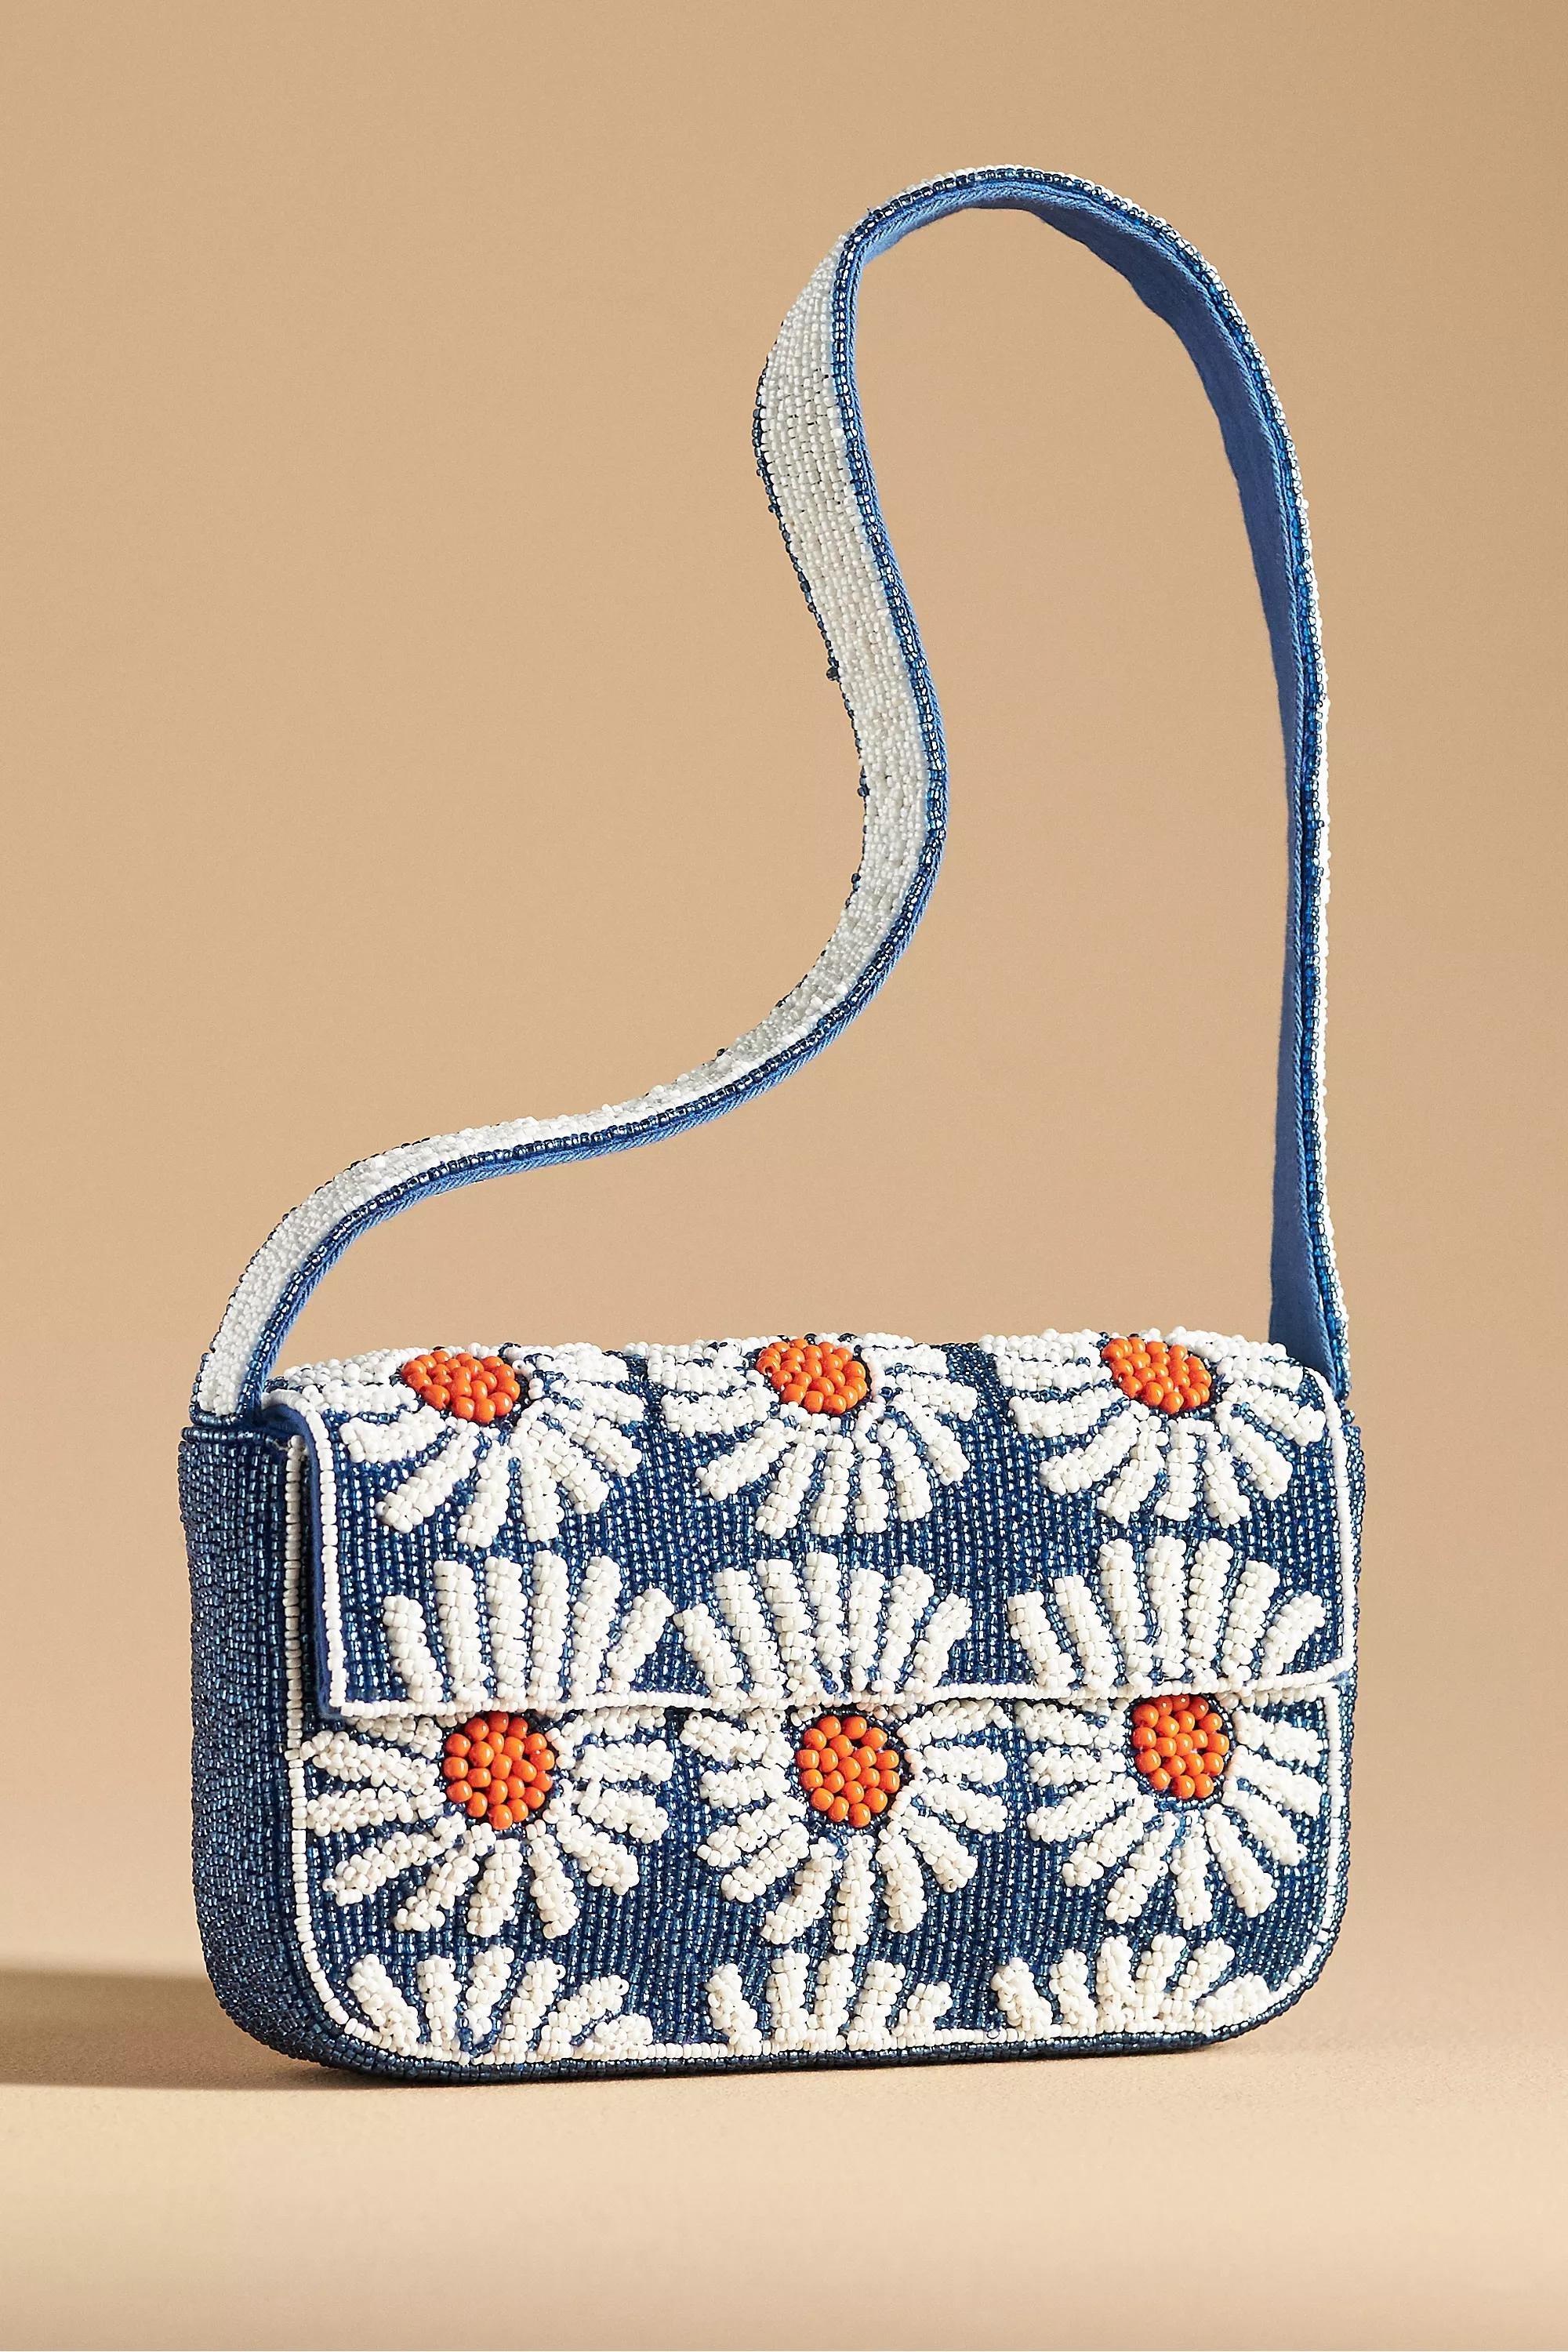 Anthropologie - The Fiona Beaded Bag: Bloom Edition, Blue